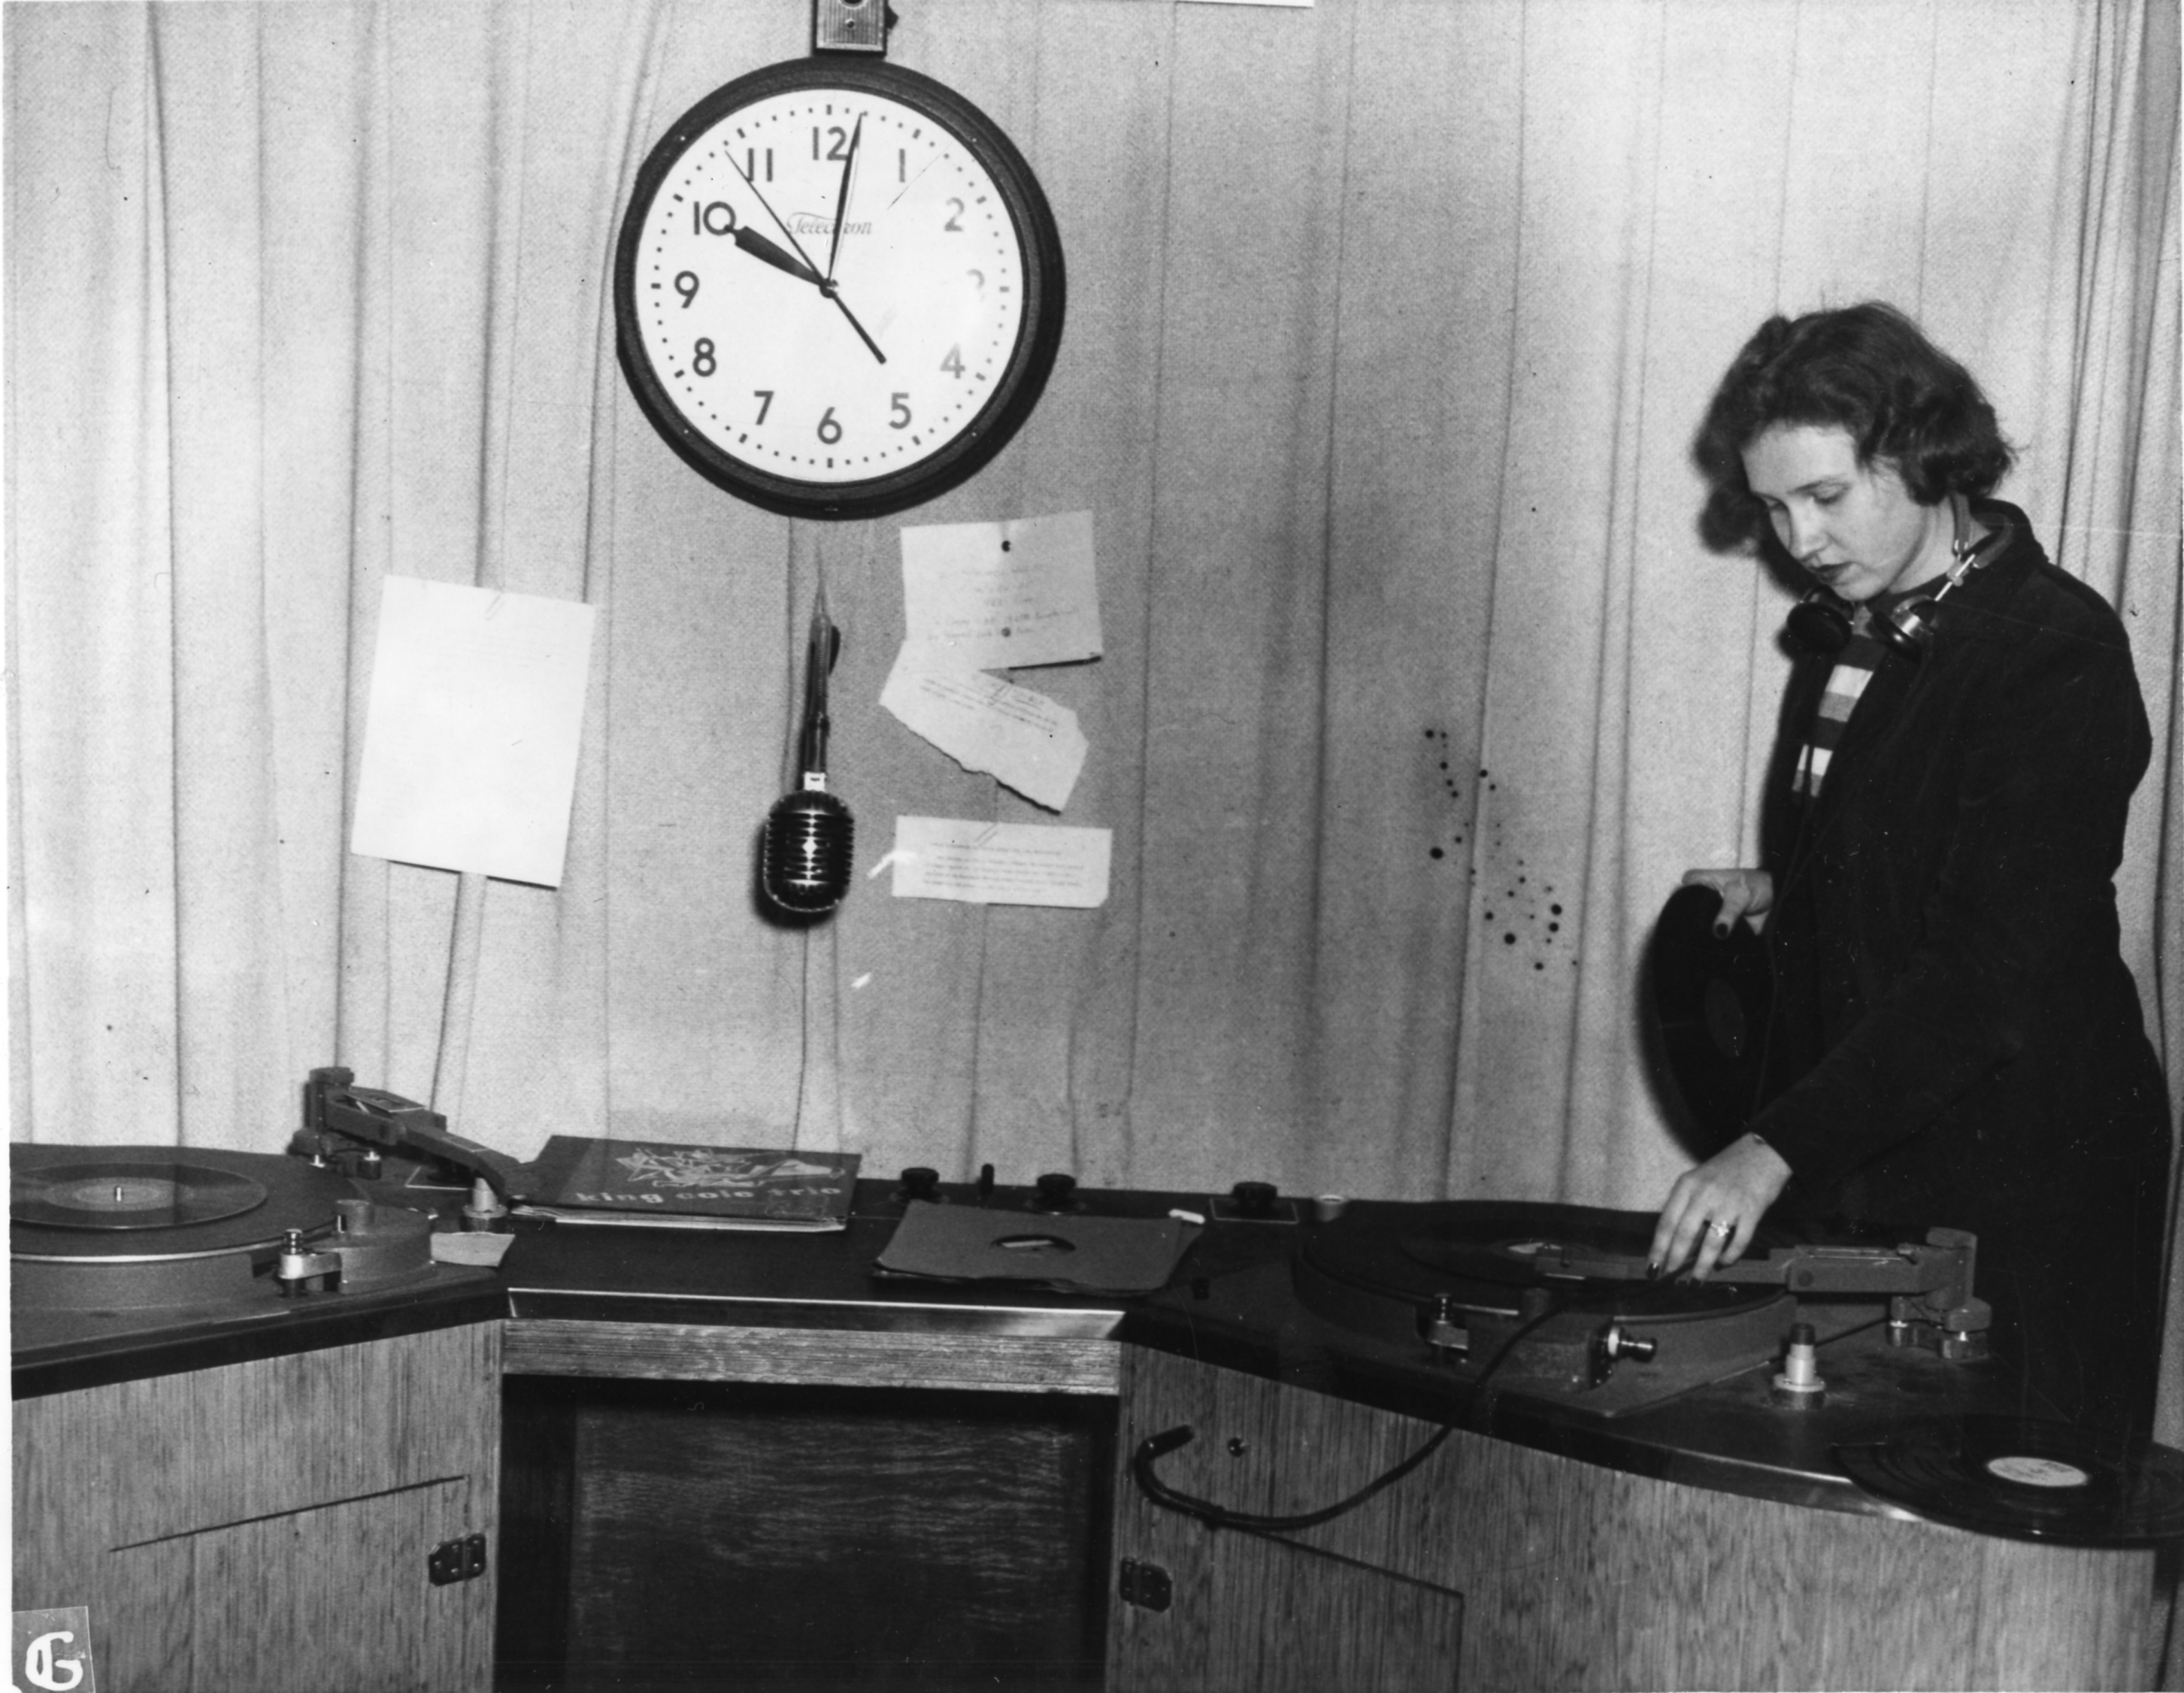 From RUTGERS NEWS SERVICE, year unknown – WRSU ON THE AIR AFTER FACELIFT:  Joan Hendricks of Bridgeton rehearses her weekly program of news for the girls of the New Jersey College for Women heard over the Rutgers University student station WRSU in the newly-renovated studios.